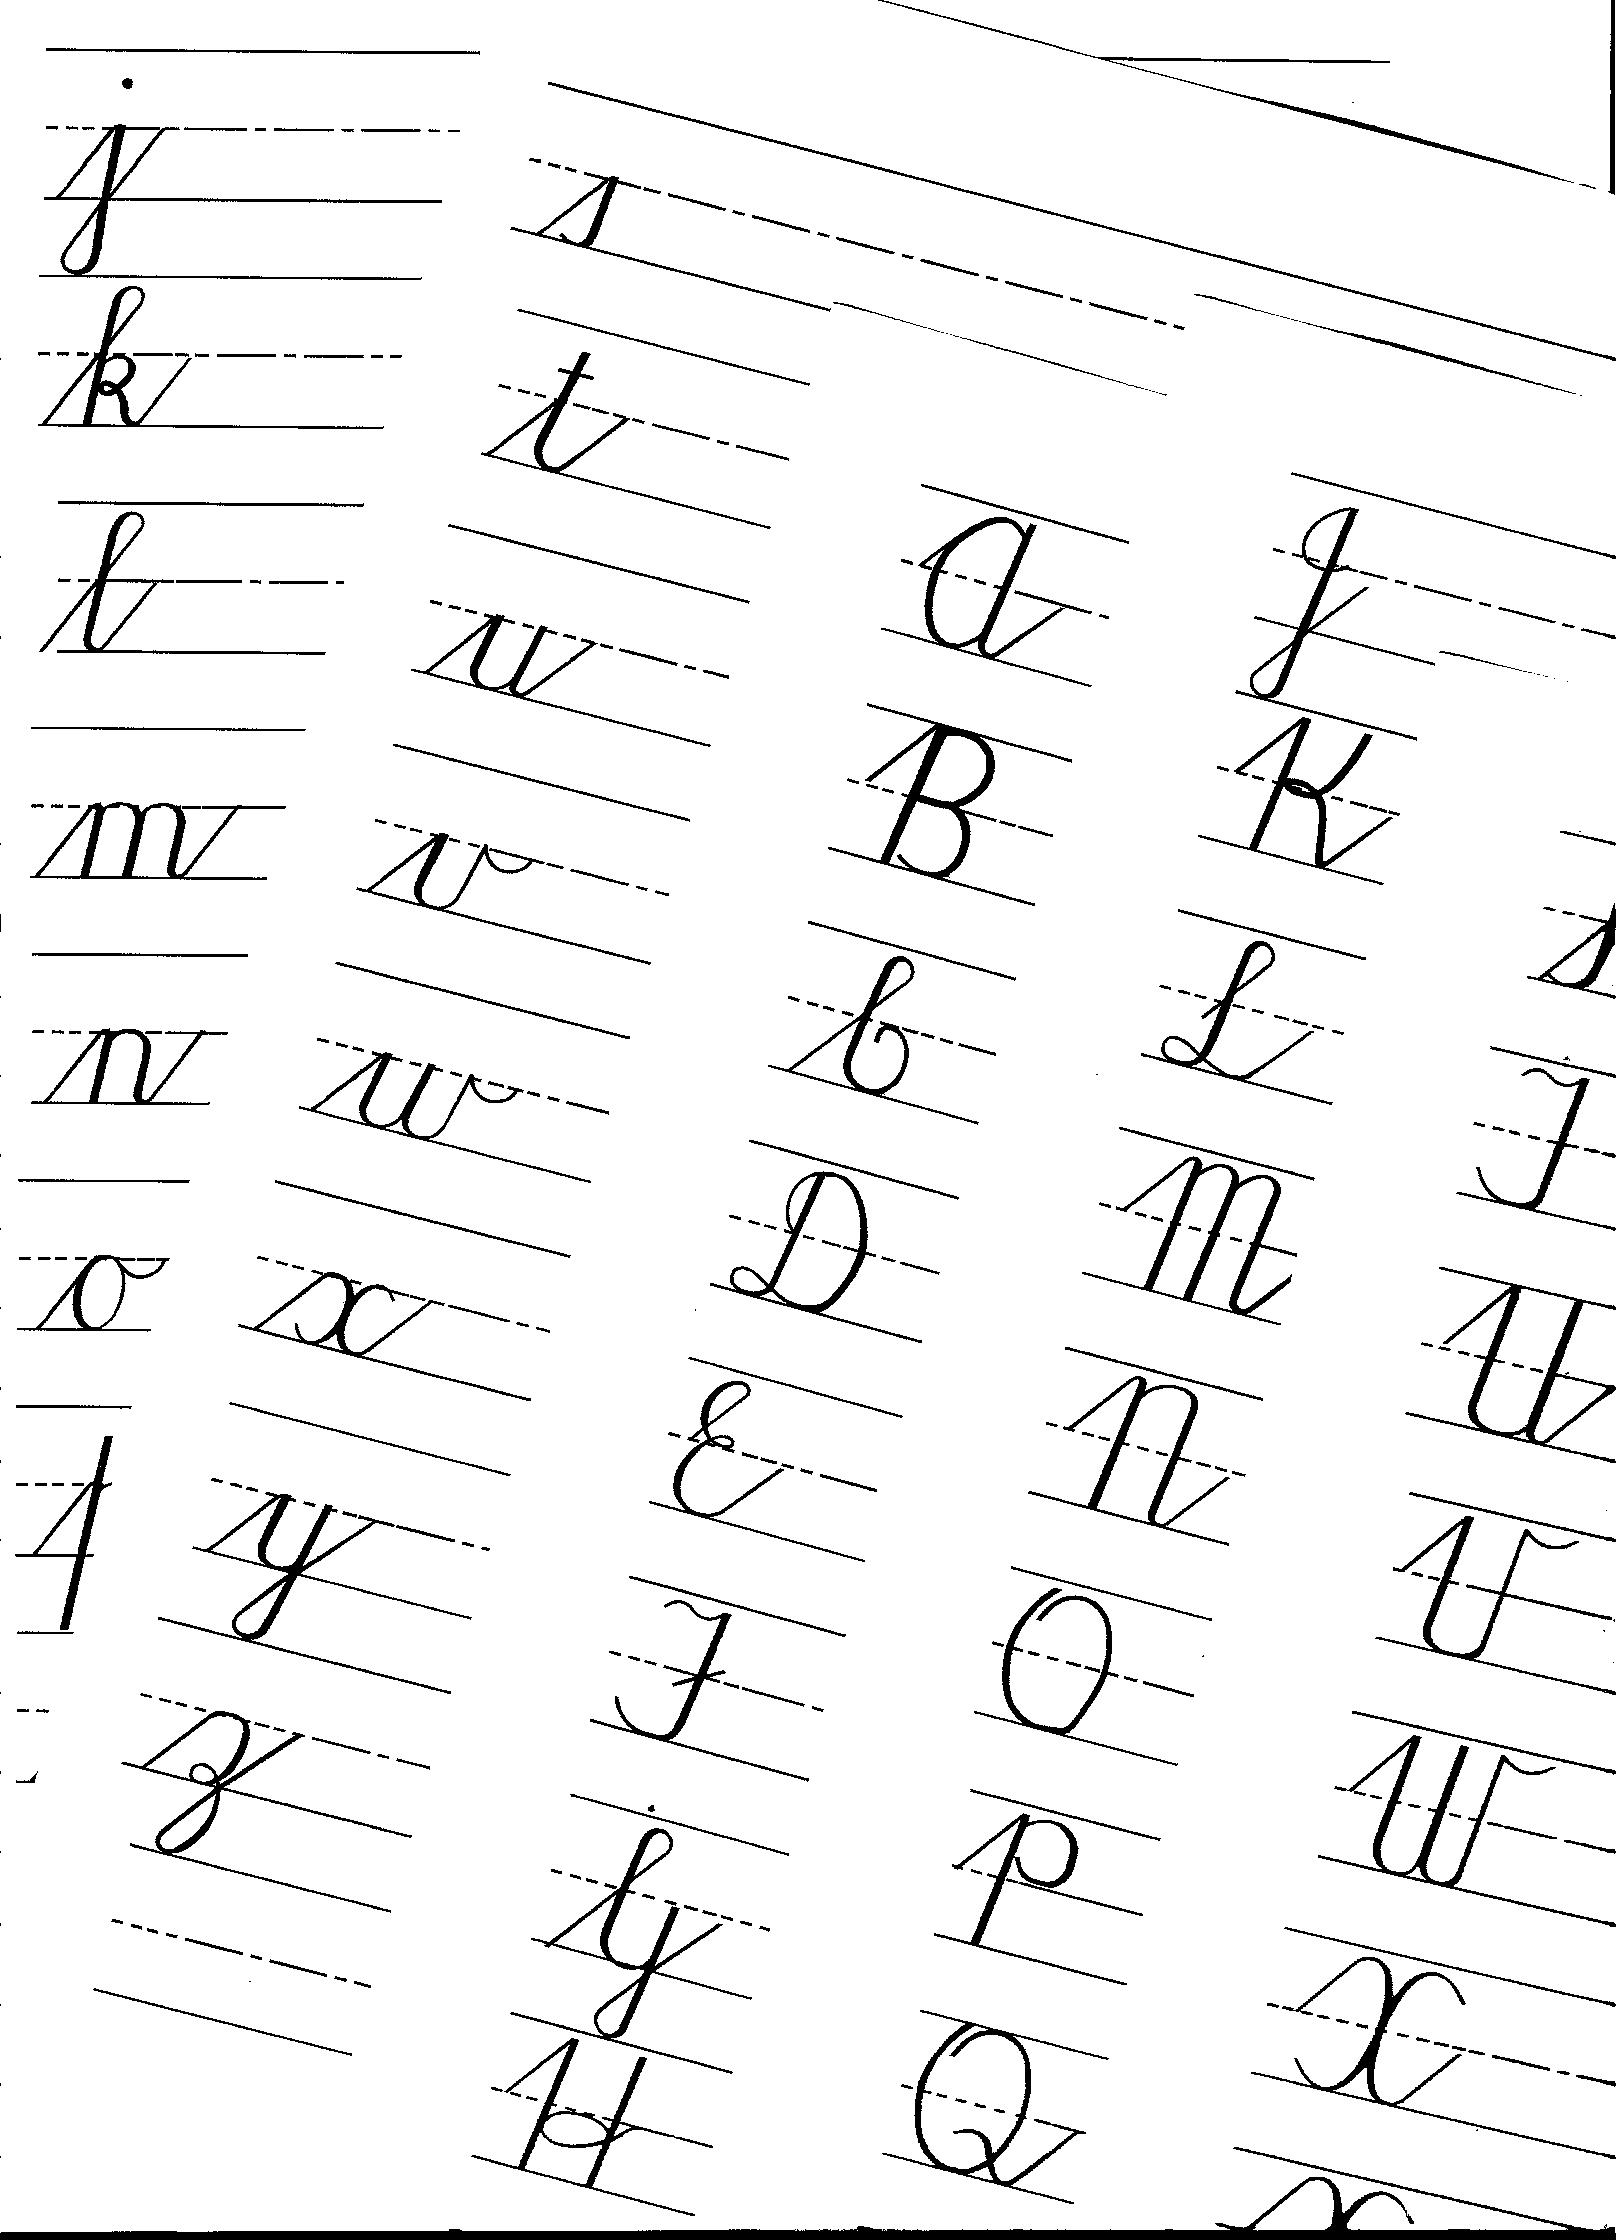 9-best-images-of-cursive-writing-worksheets-letter-f-printable-practice-cursive-writing